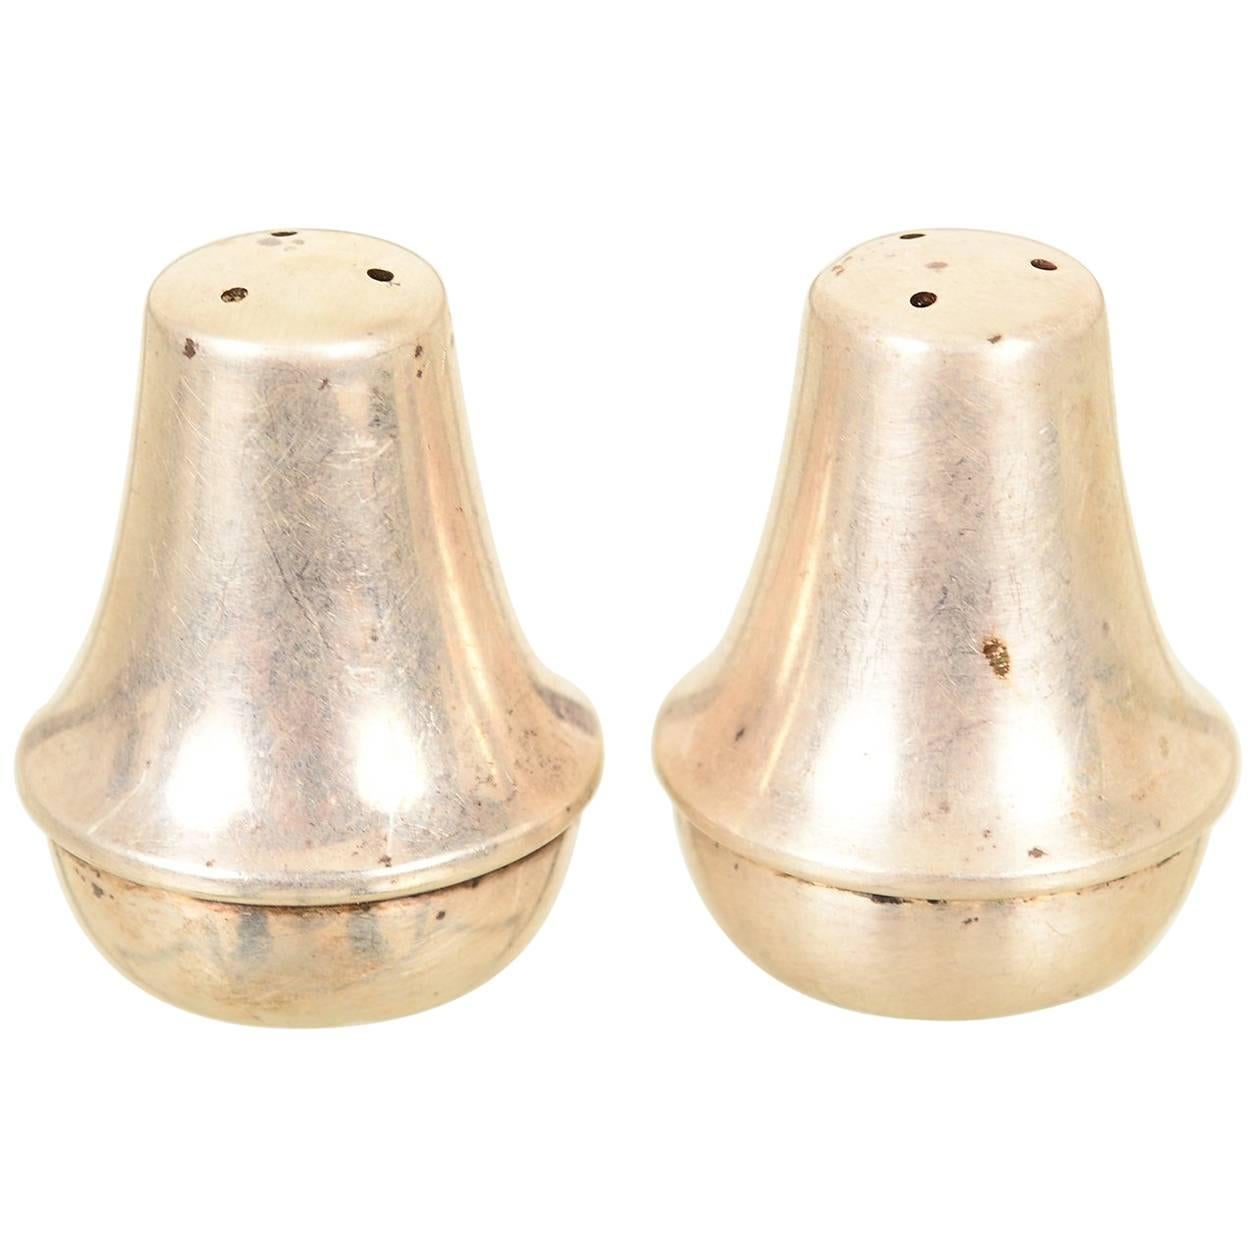 Pair of Mid-Century Modern Silver Salt and Pepper Shakers